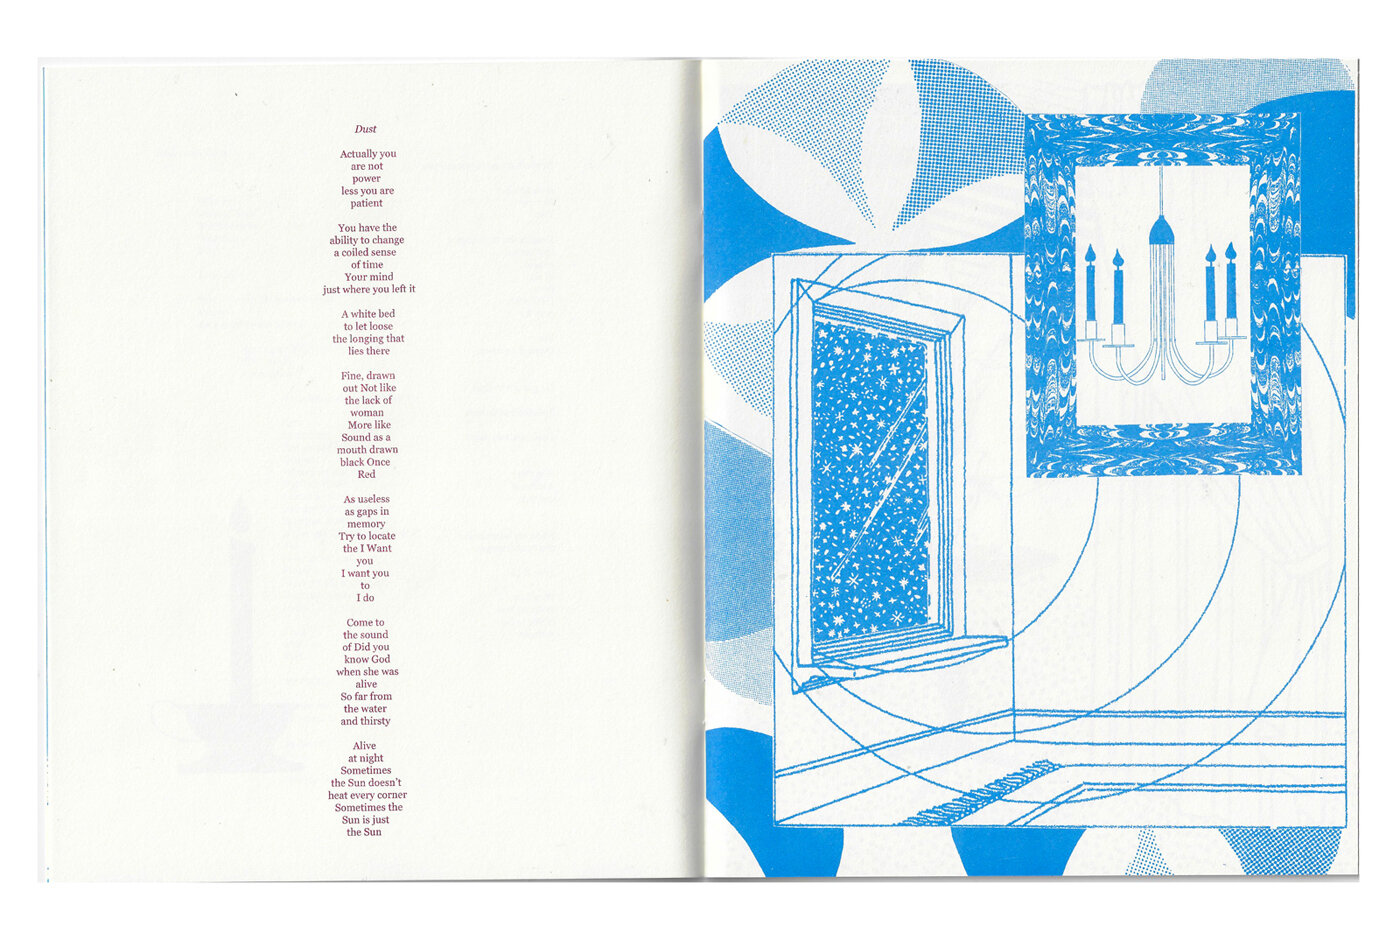  So far from the water and thirsty   Collaboration with Brooke Manning   24 pages, saddle stitched, risograph printed   edition of 200, first edition 2018  edition of 200, second edition 2020 